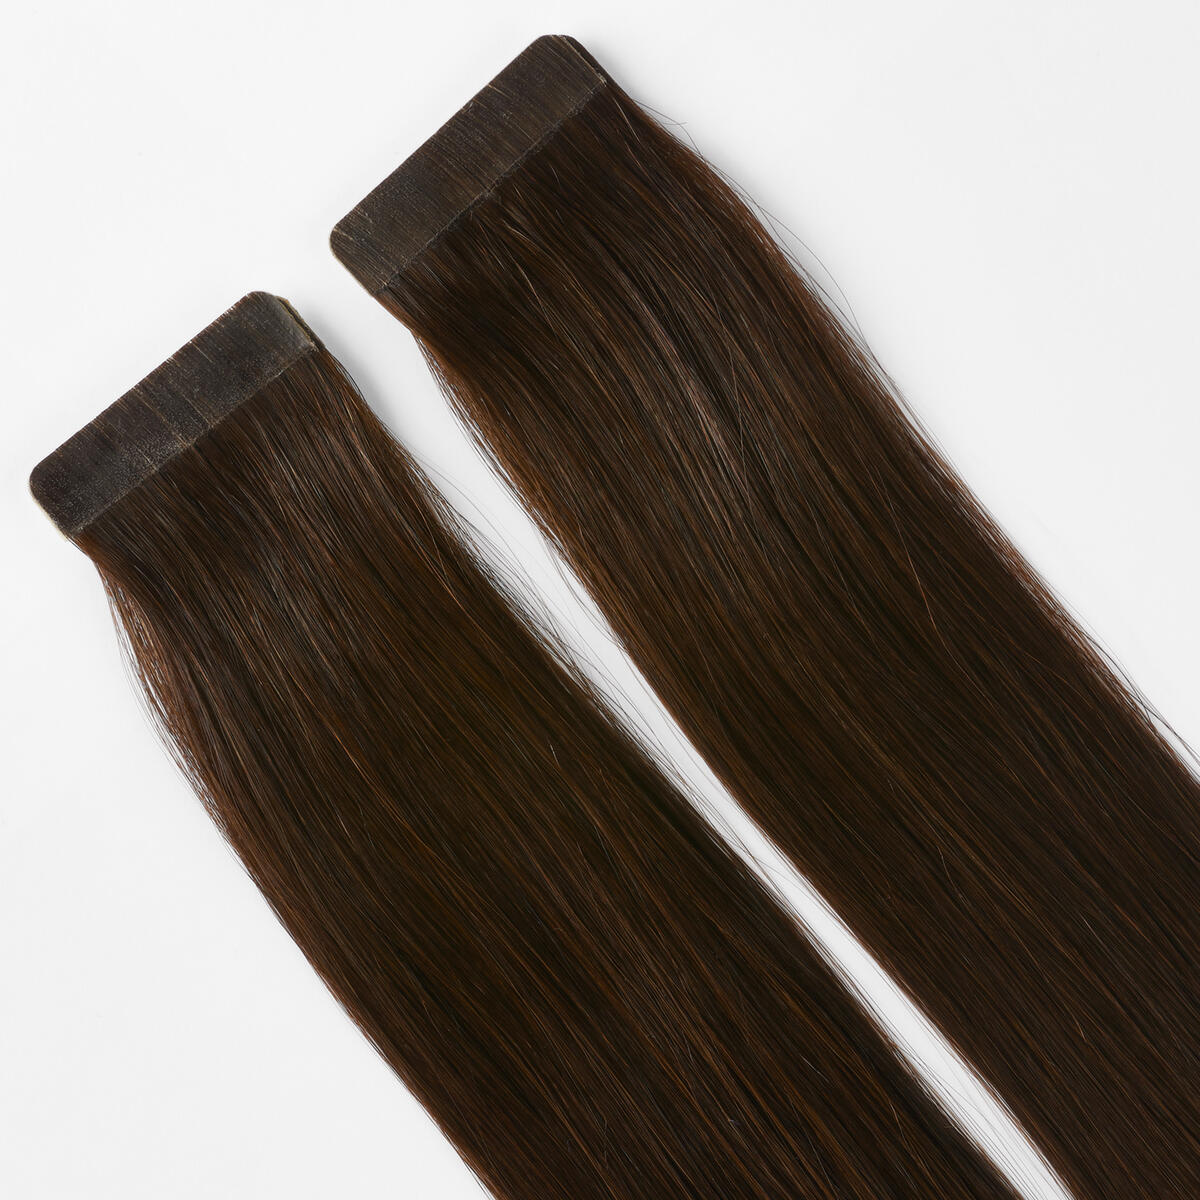 Basic Tape Extensions Classic 4 2.3 Chocolate Brown 70 cm